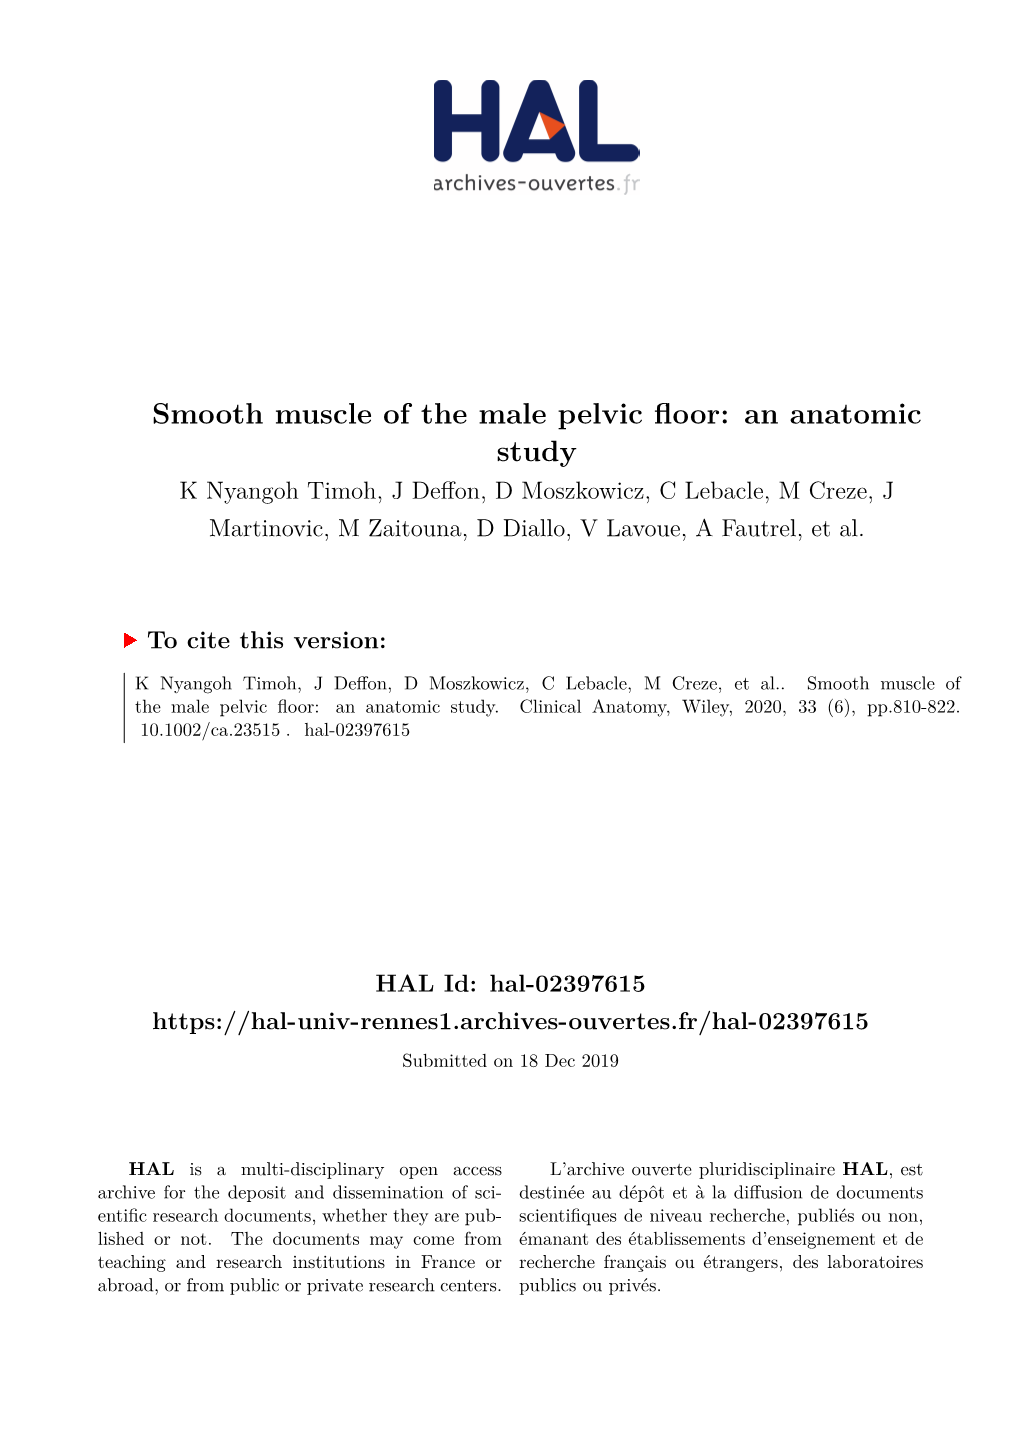 Smooth Muscle of the Male Pelvic Floor: an Anatomic Study